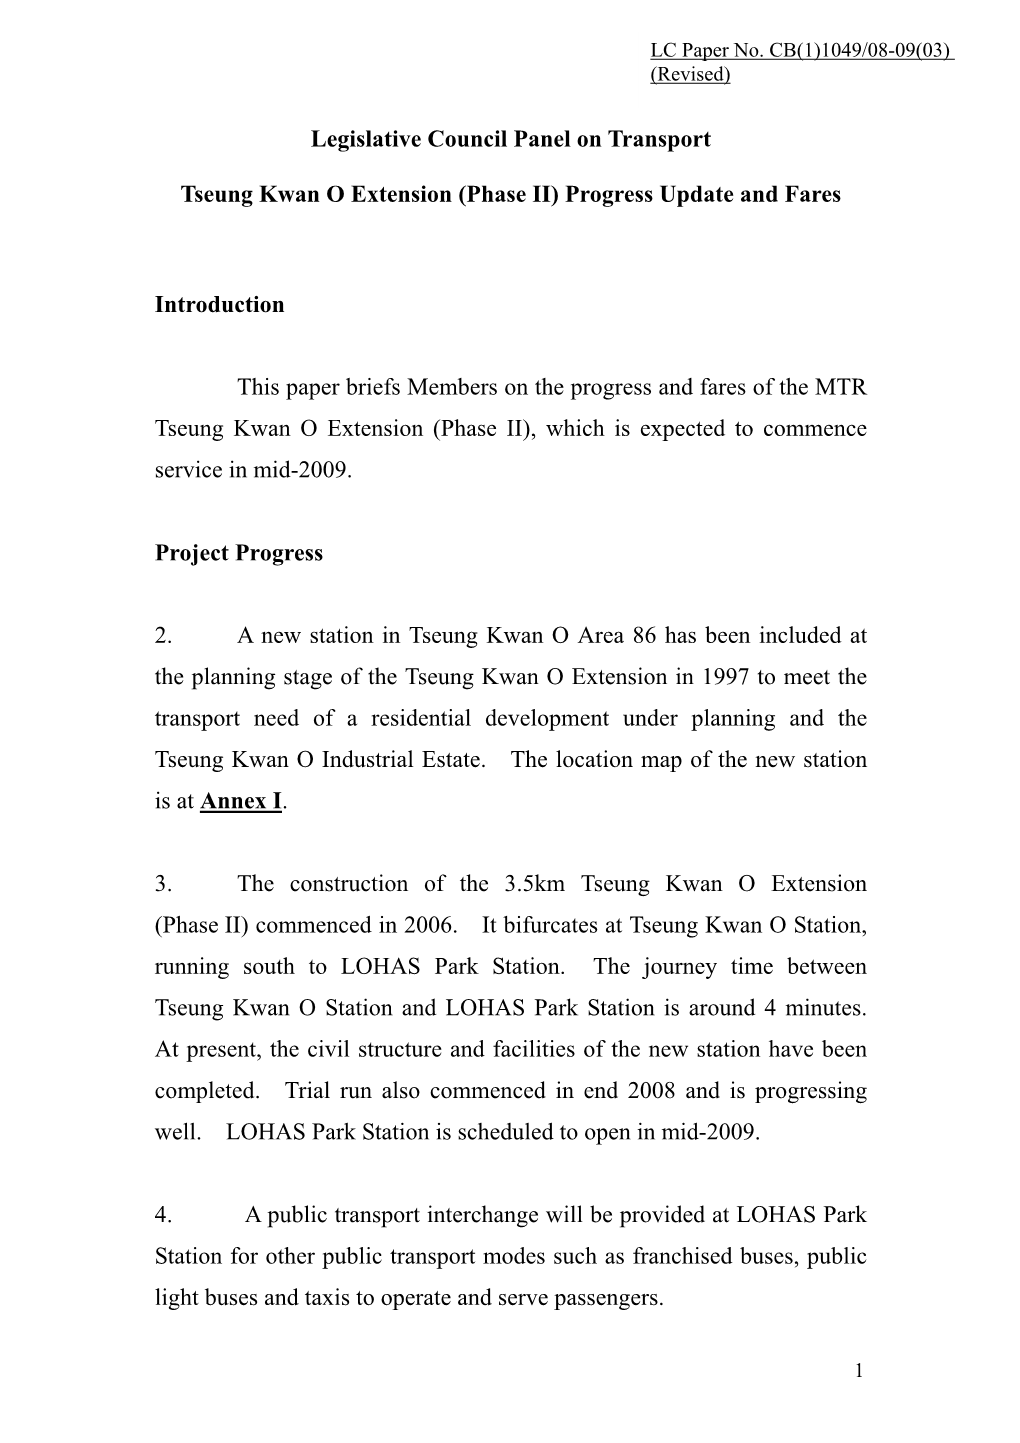 Paper on Tseung Kwan O Extension (Phase